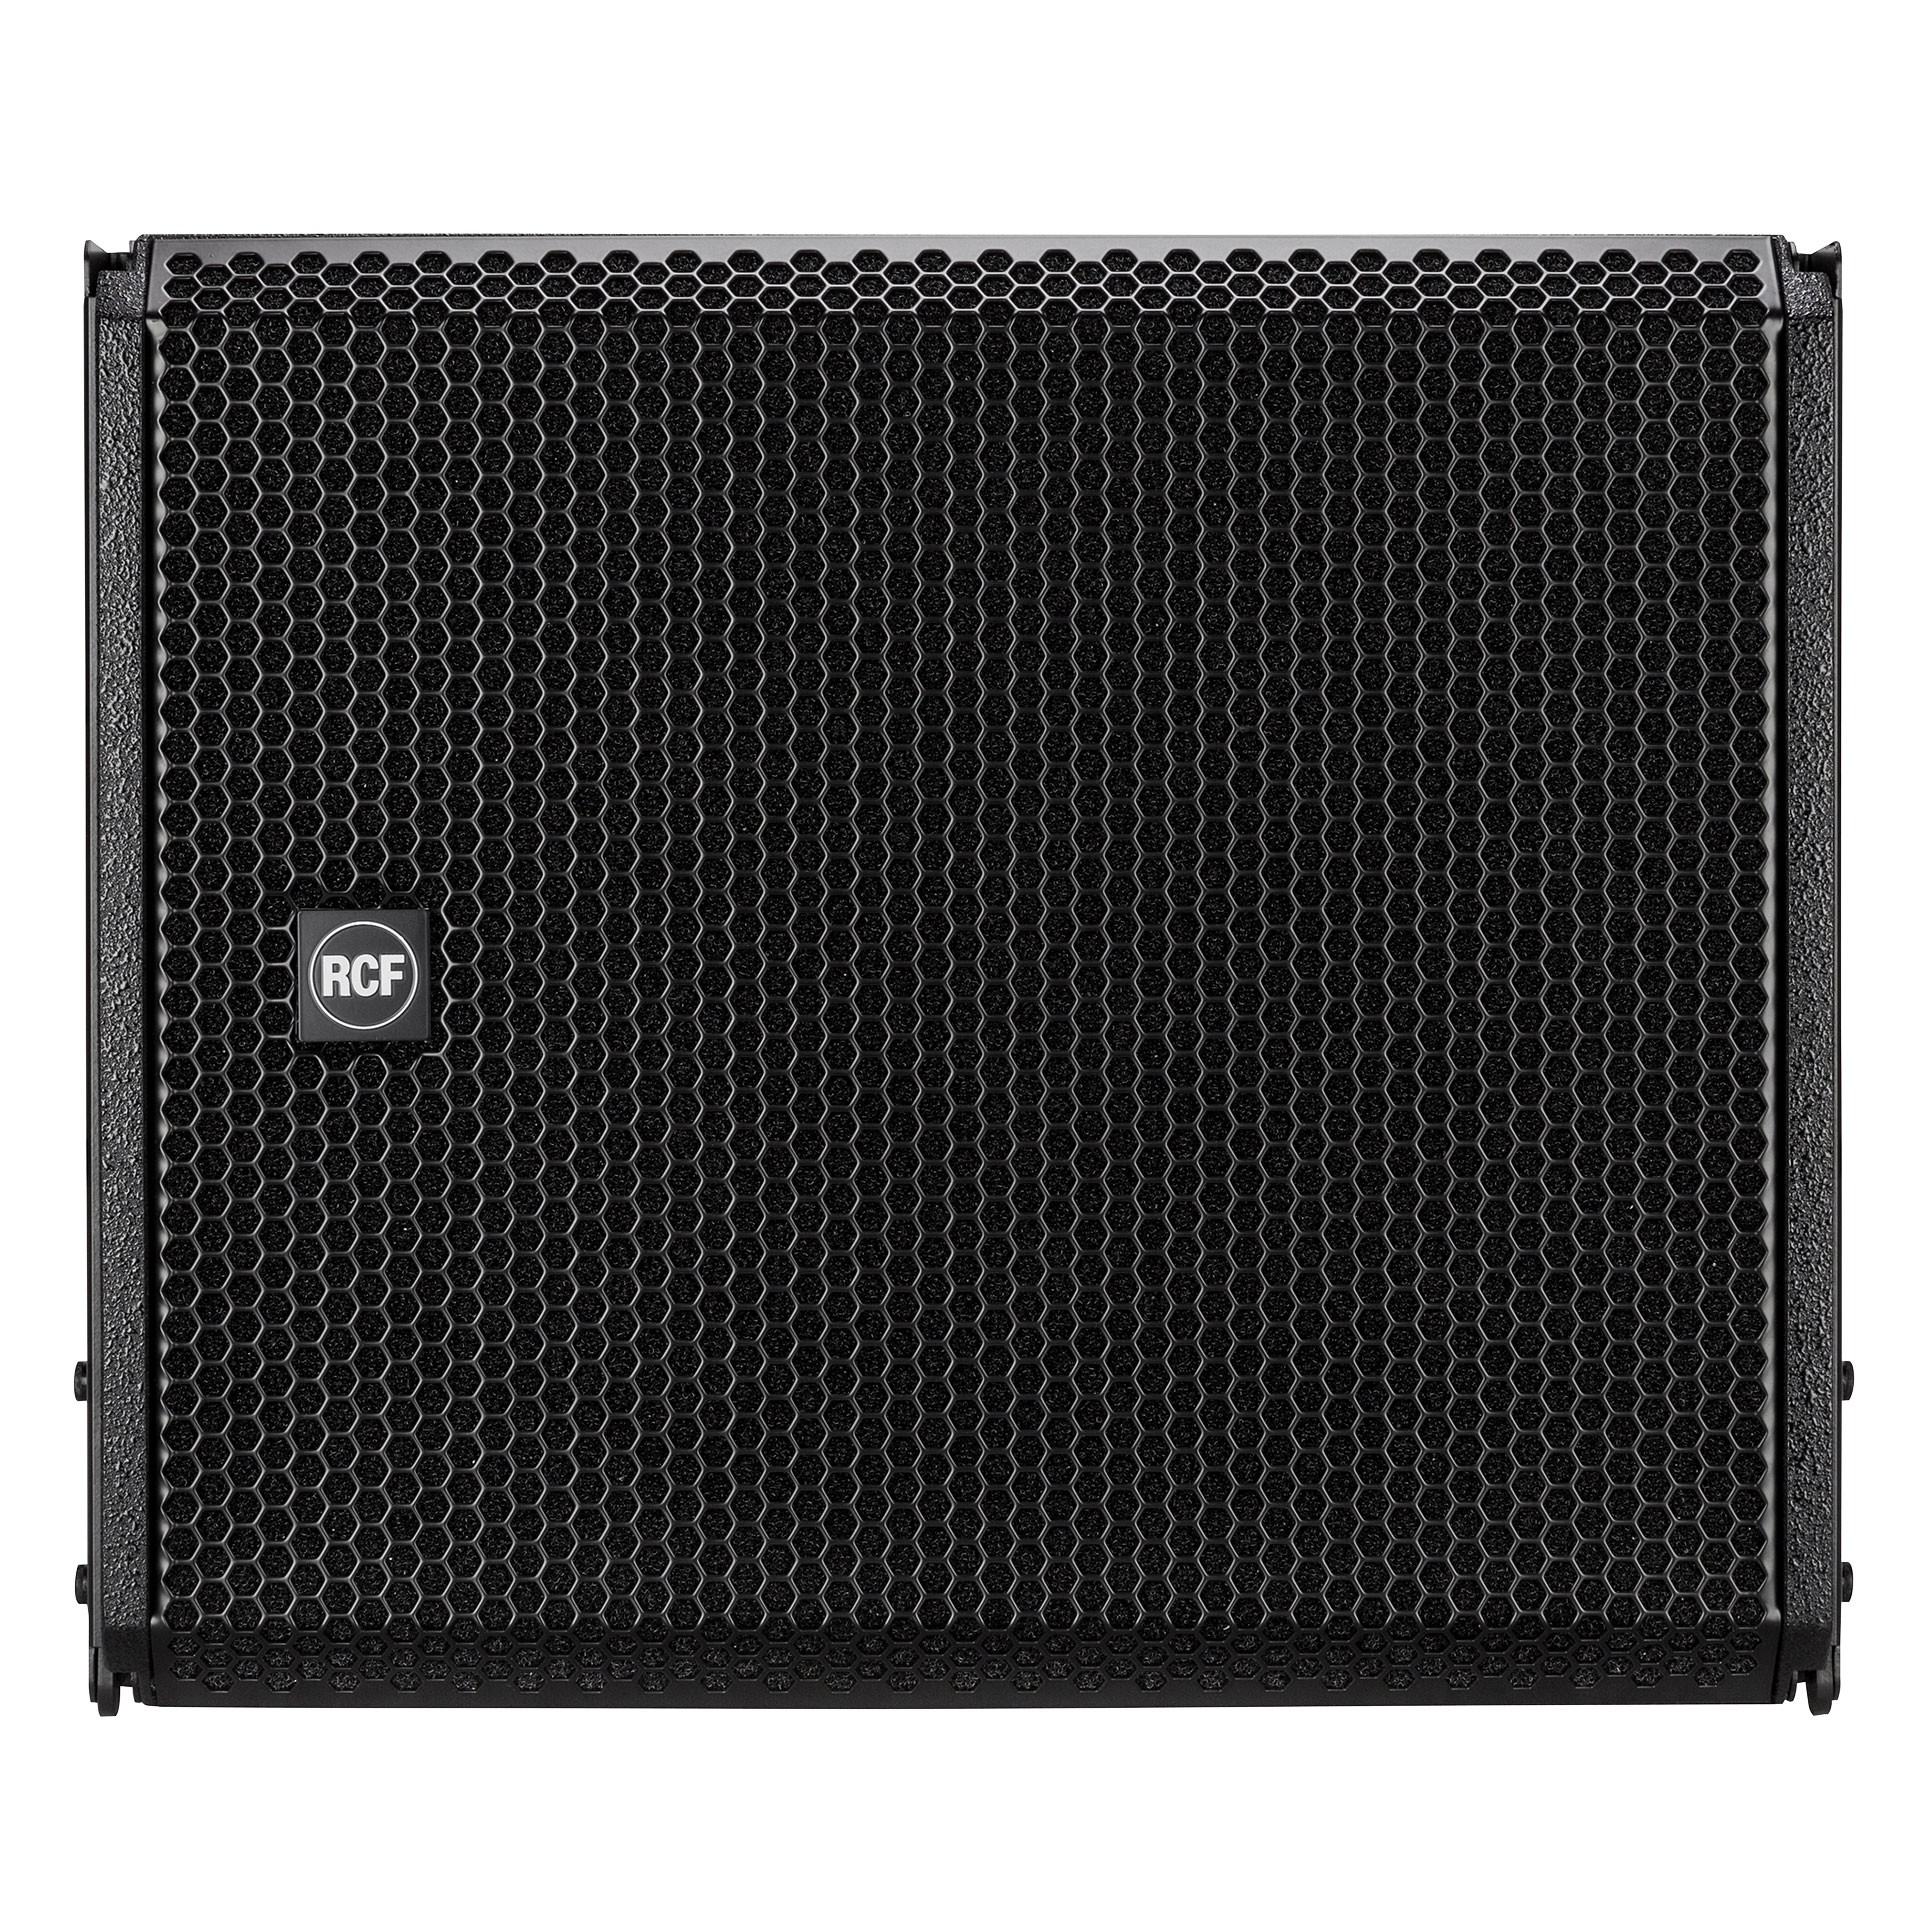 Subwoofere pro - Subwoofer activ RCF HDL 36-AS, audioclub.ro